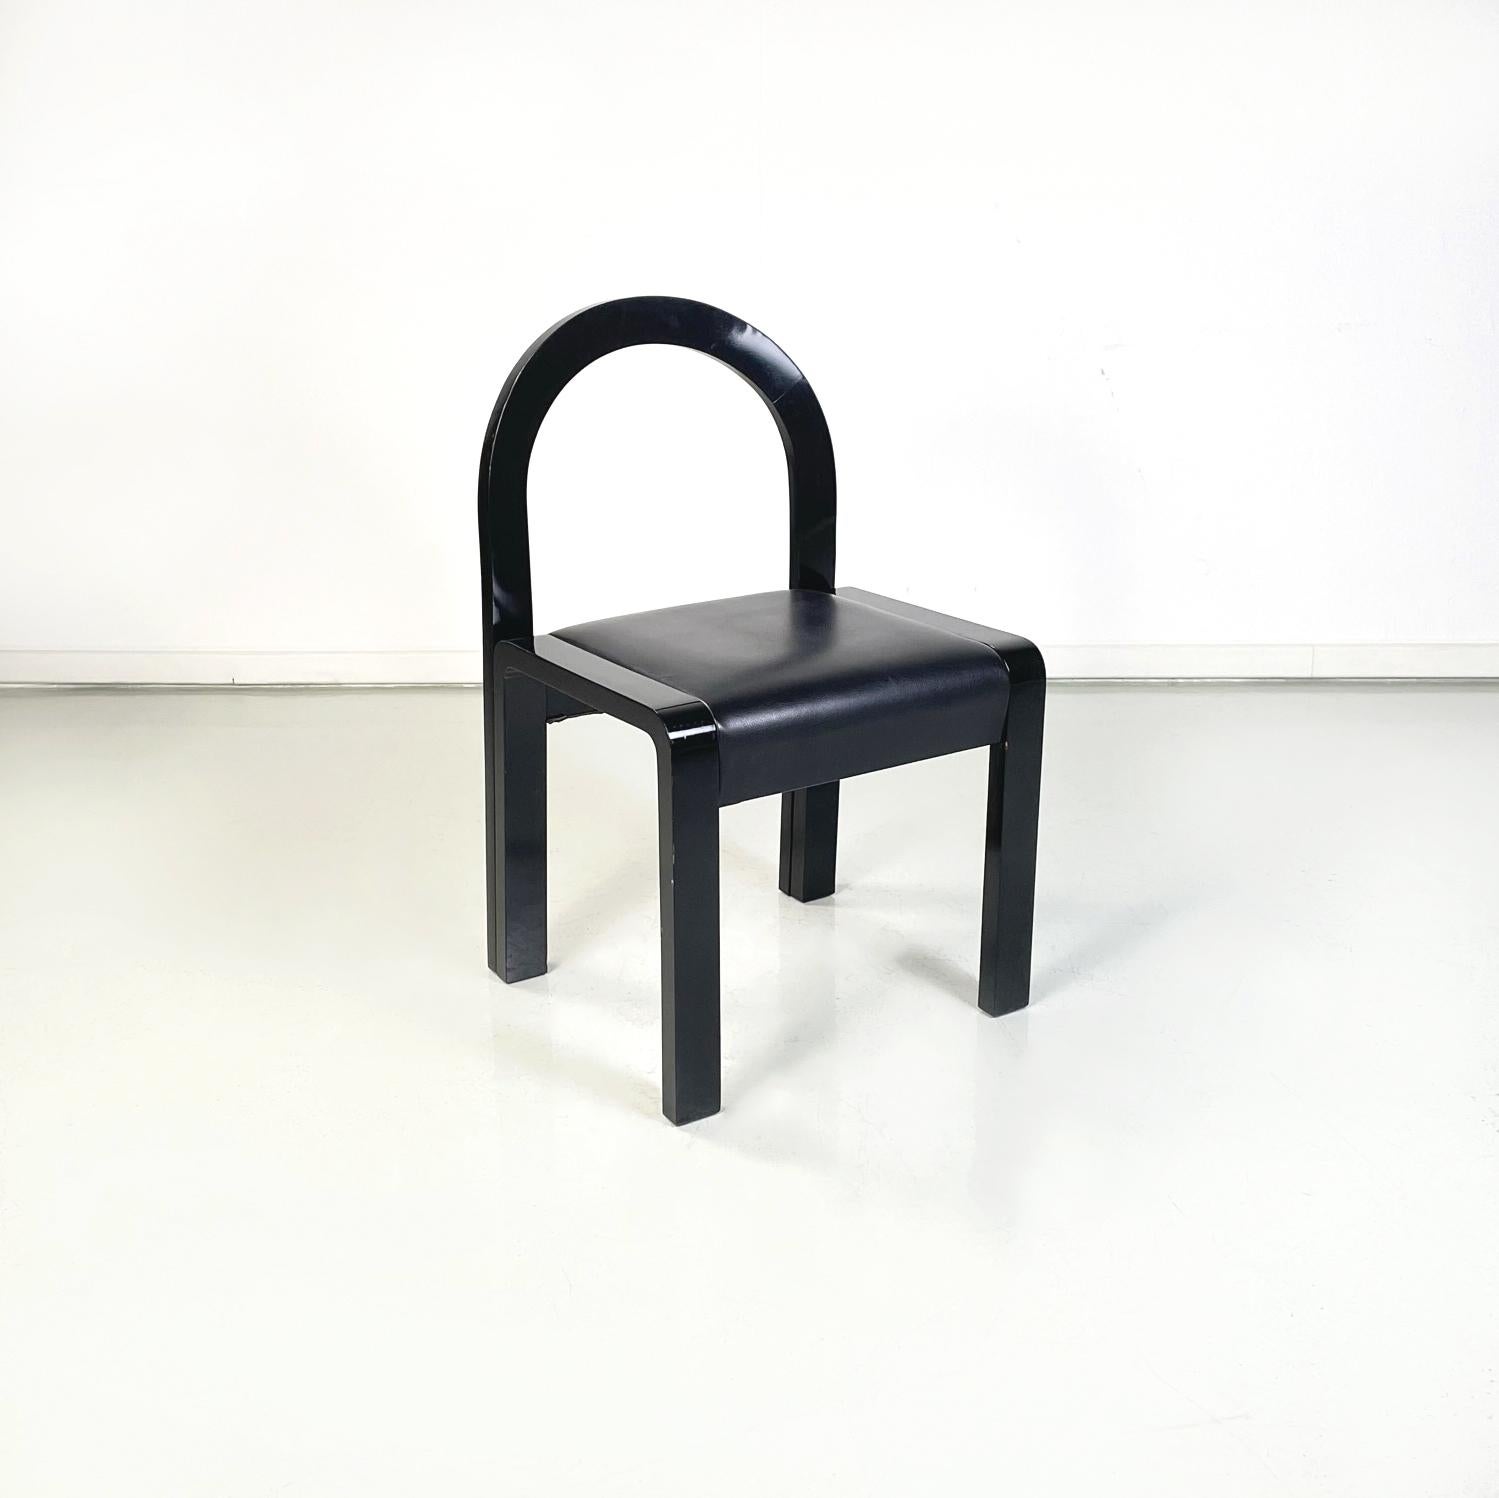 Italian modern Chairs in black lacquered wood and black leather, 1980s
Set of six chairs with square seat in black leather. The arched backrest and the rectangular section structure is in black lacquered wood.
1980s.
These chairs are in very good